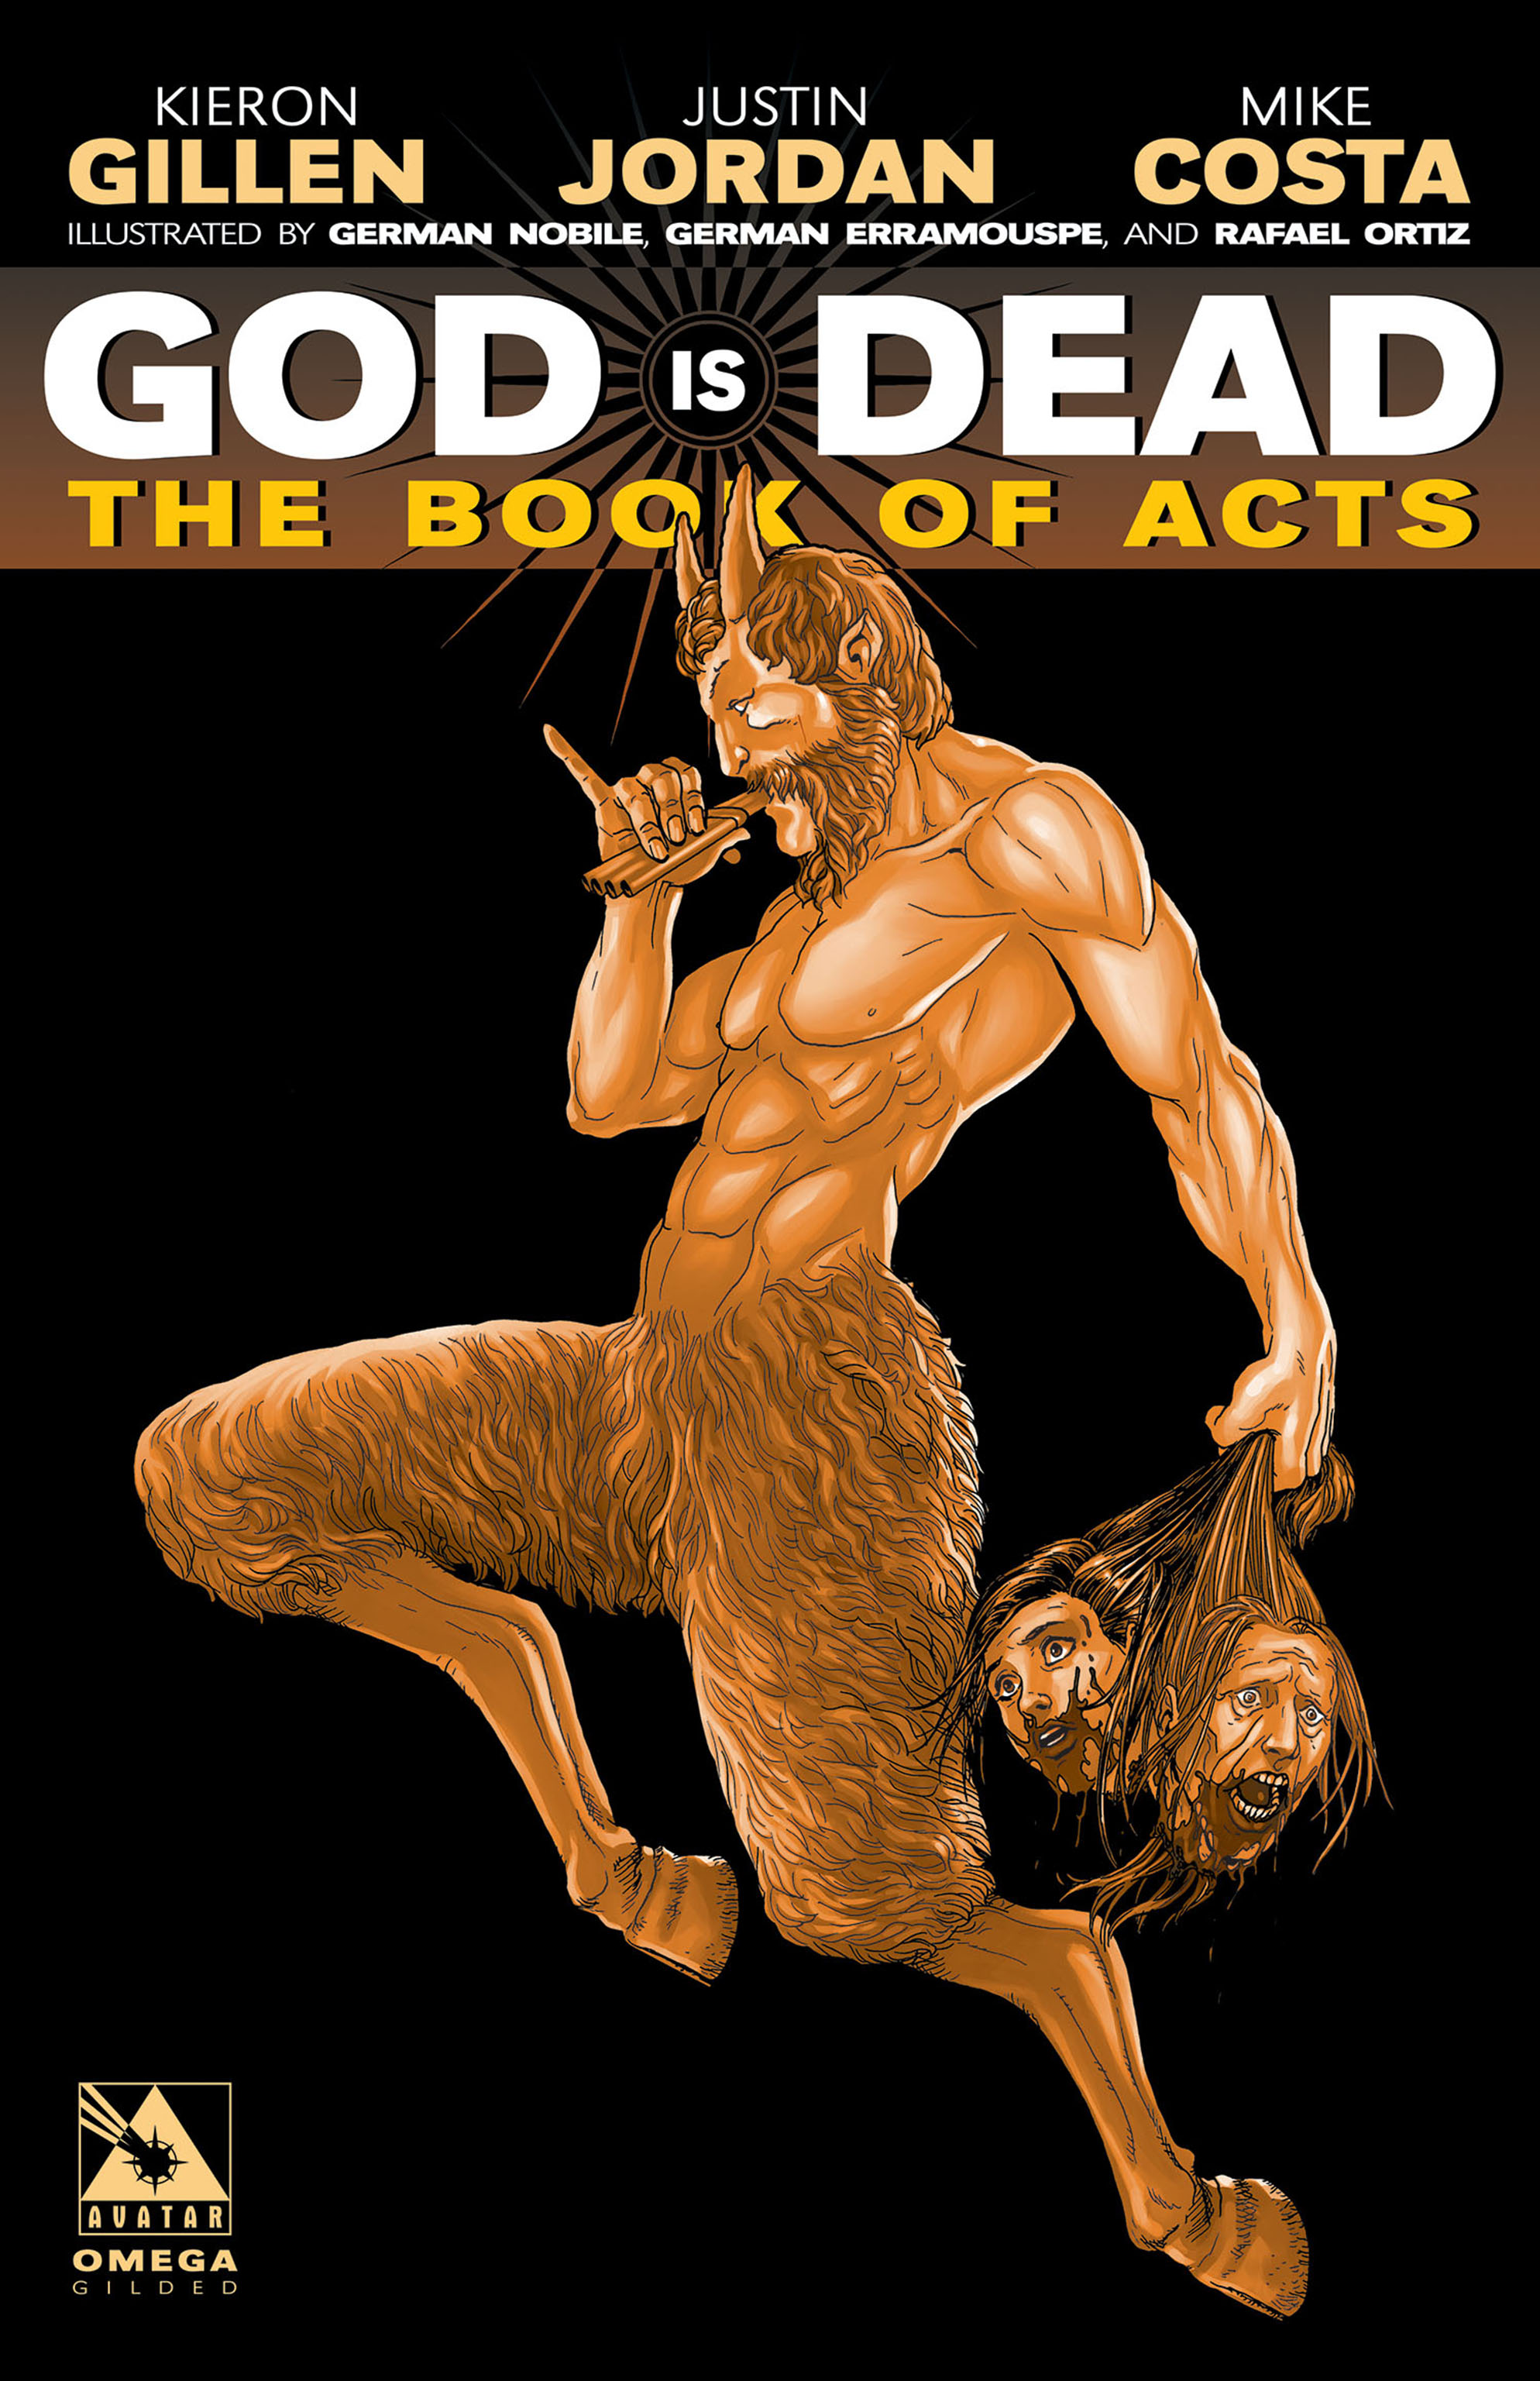 Read online God is Dead: Book of Acts comic -  Issue # Omega - 5